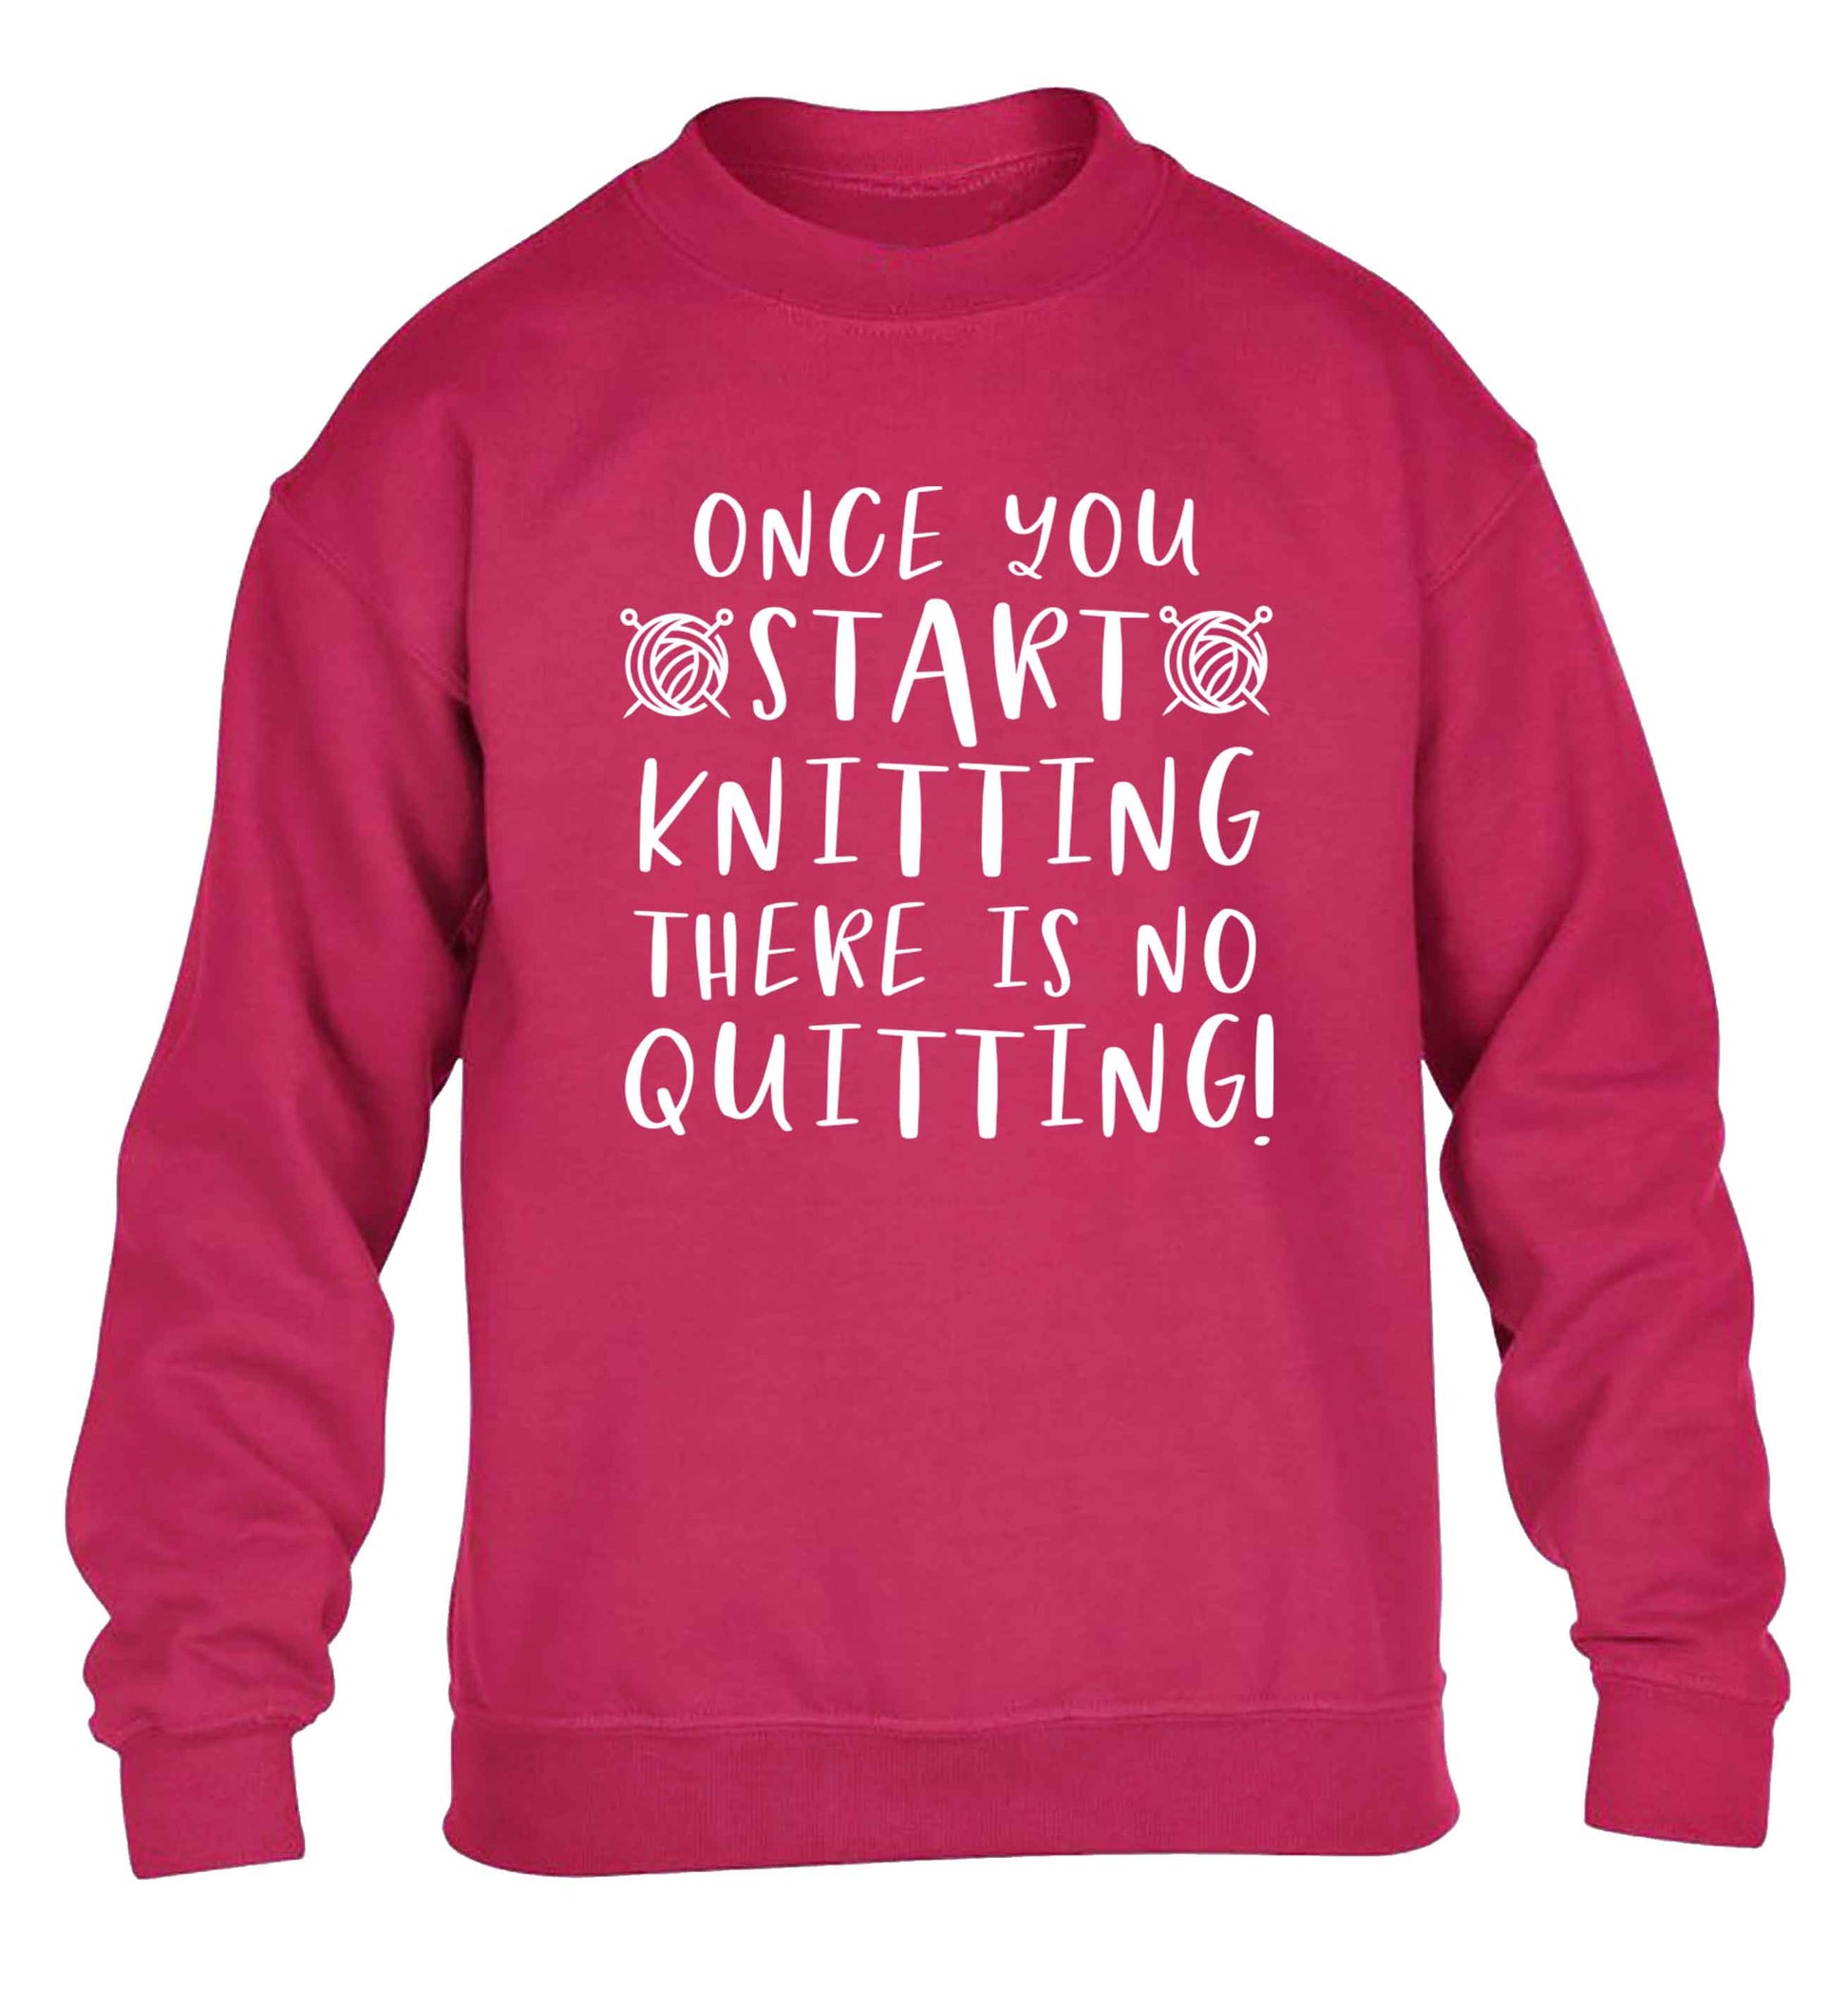 Once you start knitting there is no quitting! children's pink sweater 12-13 Years